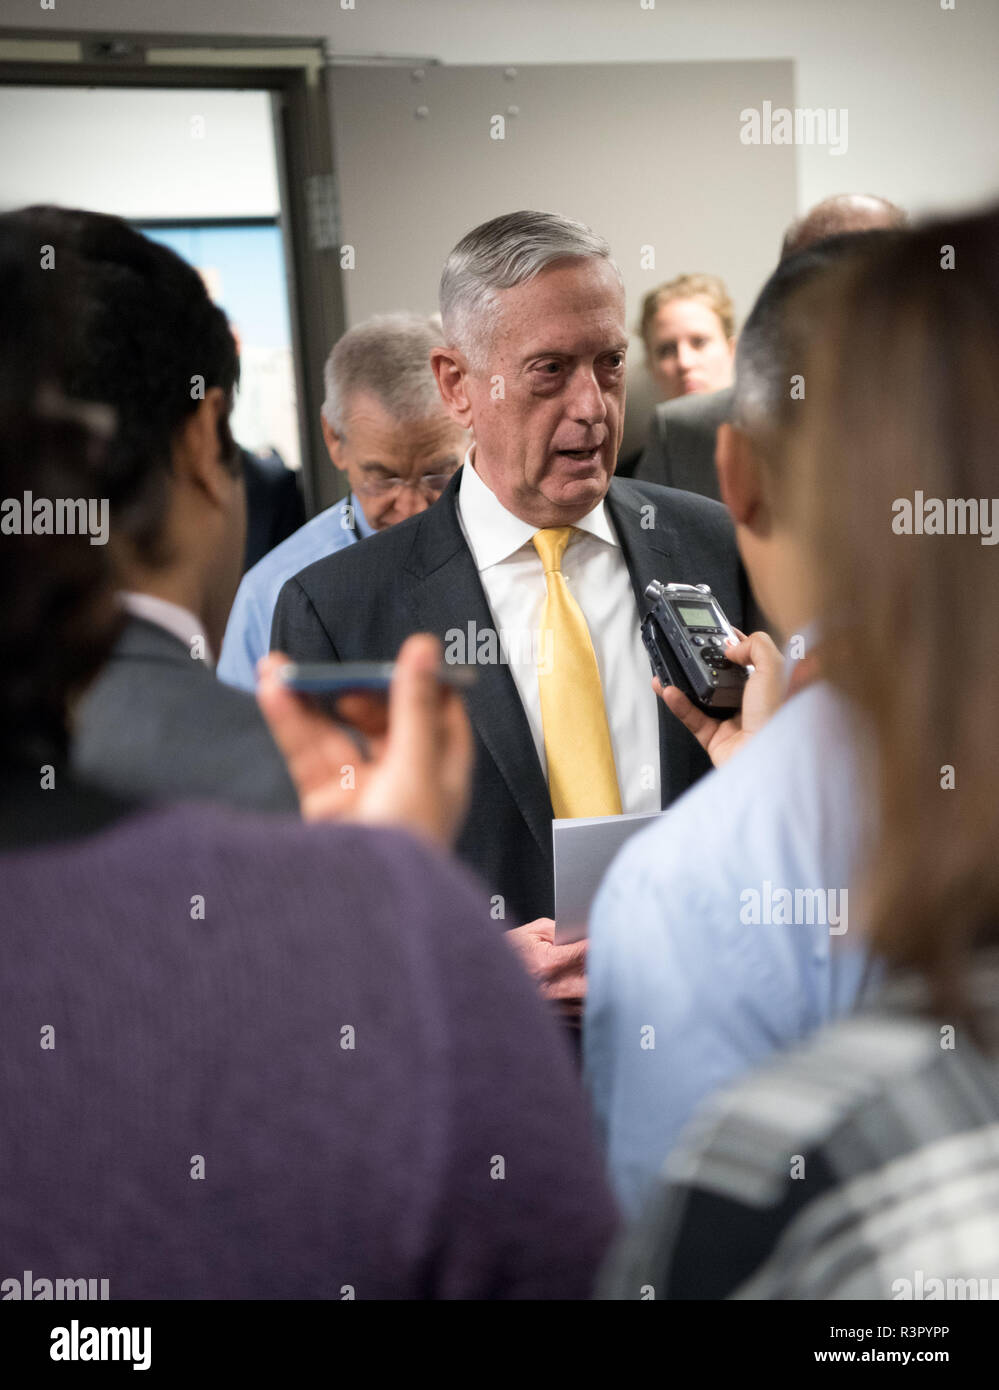 U.S. Secretary of Defense James N. Mattis speaks to reporters at the Pentagon in Washington, D.C., Nov. 21, 2018. (DoD photo by Army Sgt. Amber I. Smith) Stock Photo